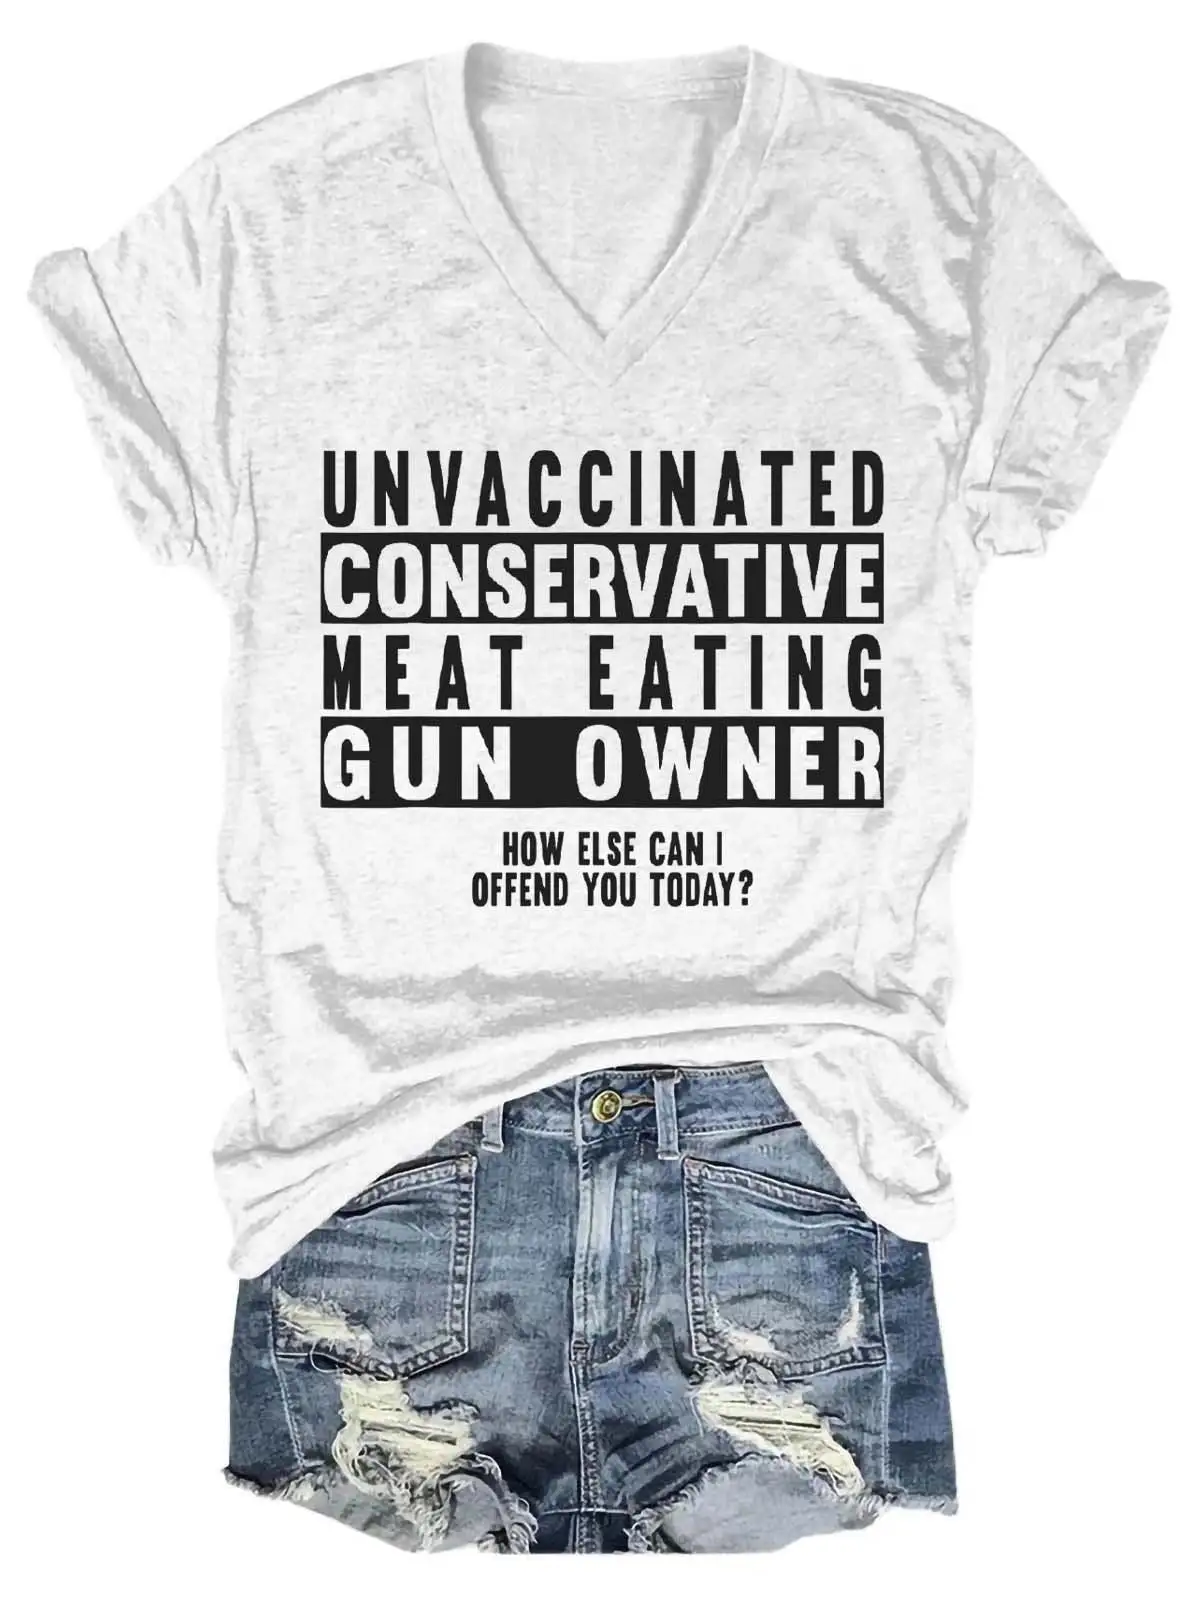 Women's Unvaccinated Conservative Meat Eating Gun Owner V-Neck T-Shirt